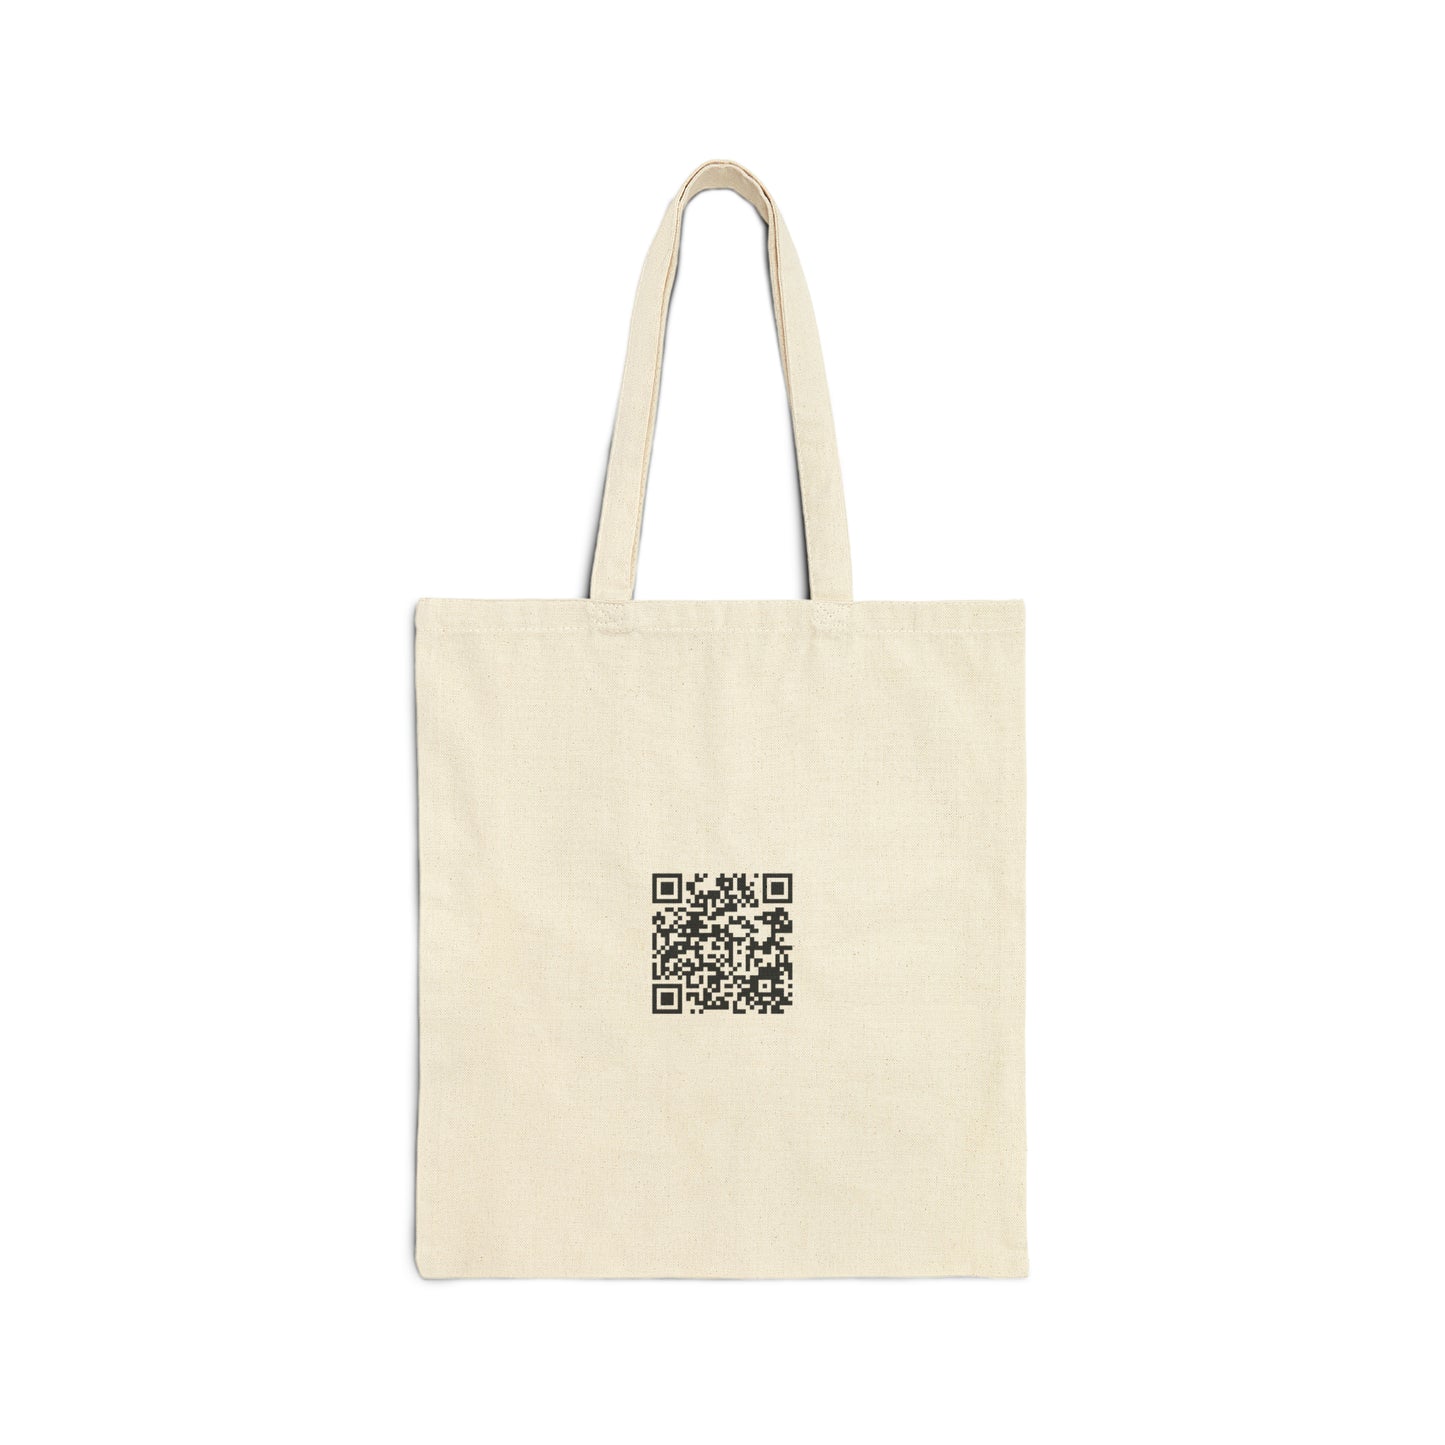 The Hunt For The Bunyip - Cotton Canvas Tote Bag